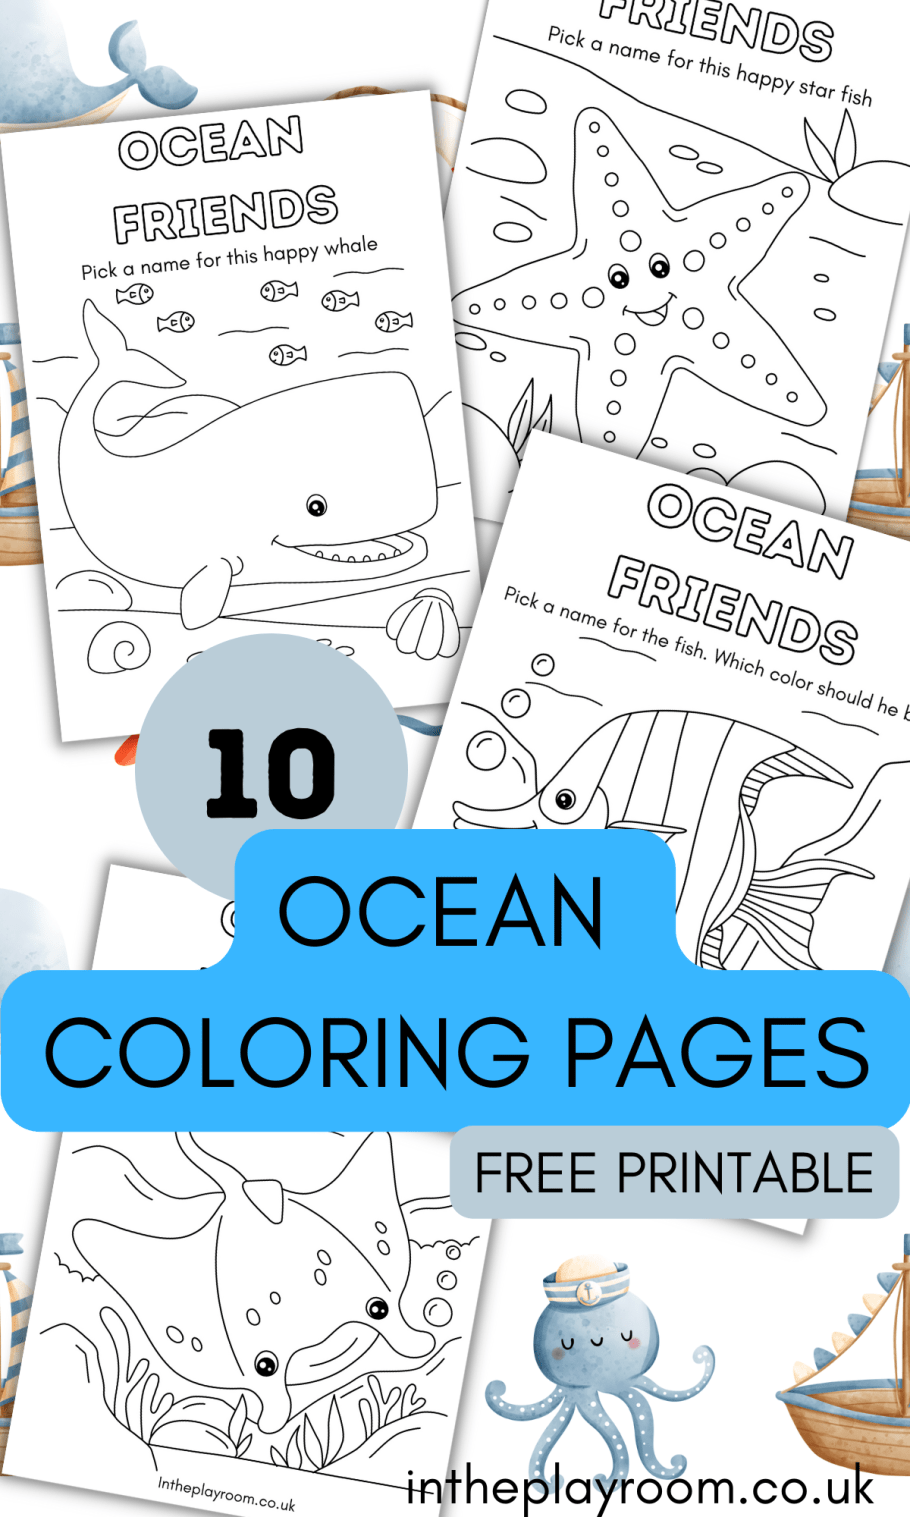 Ocean loring pages for kids